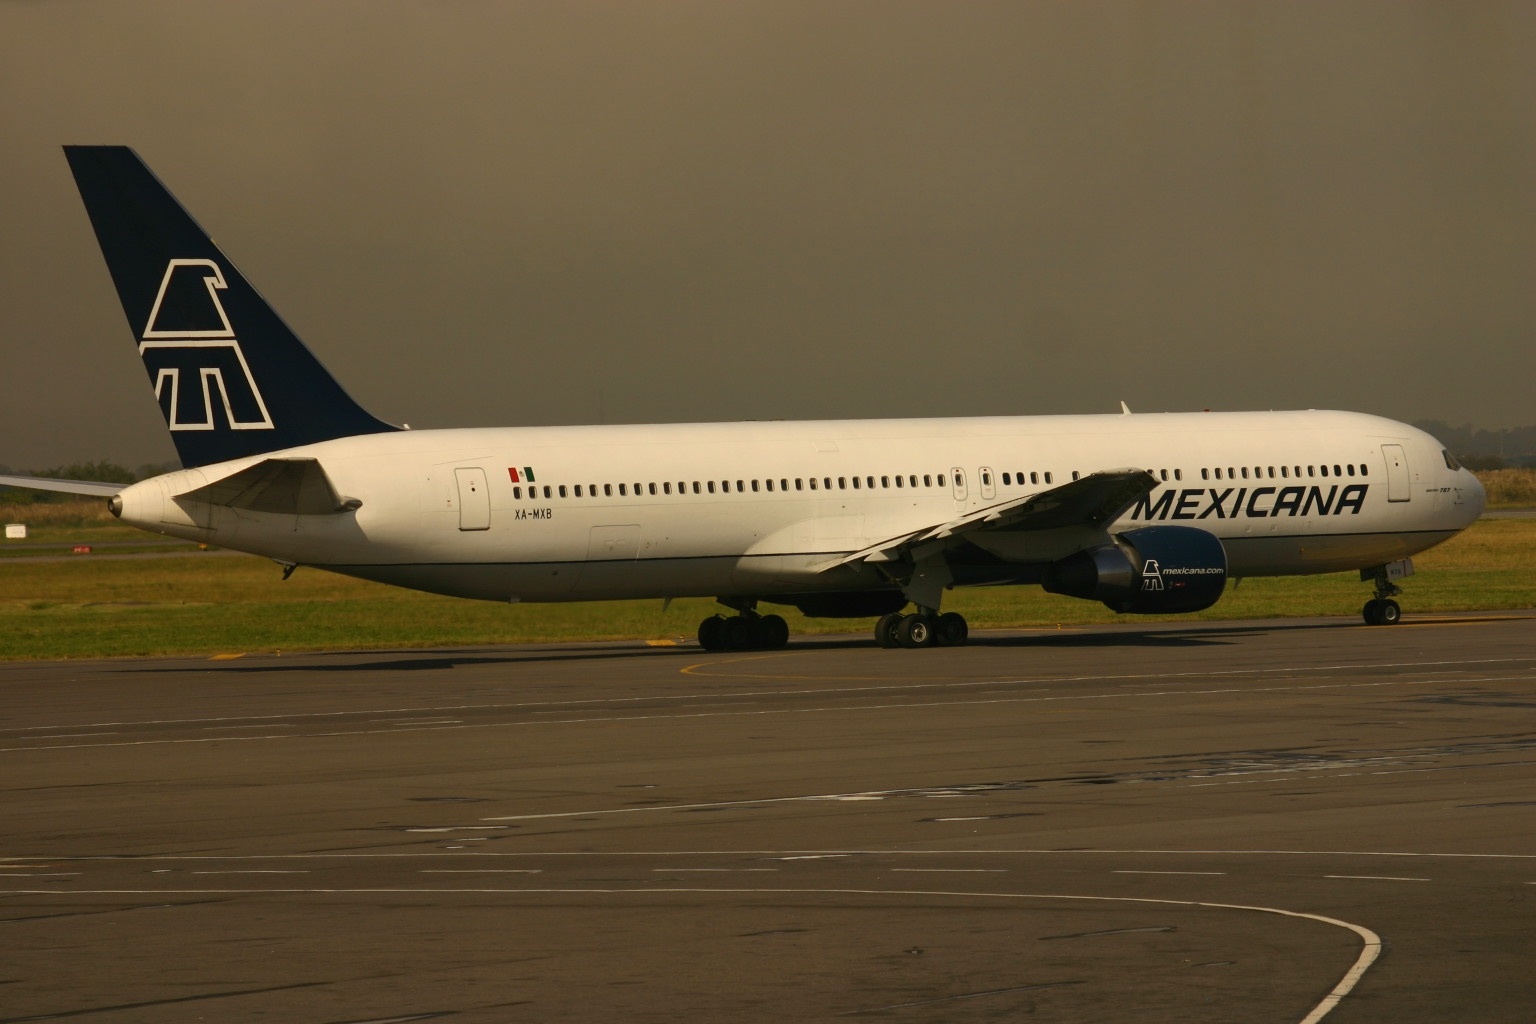 Mexicana 767 in their Old Livery